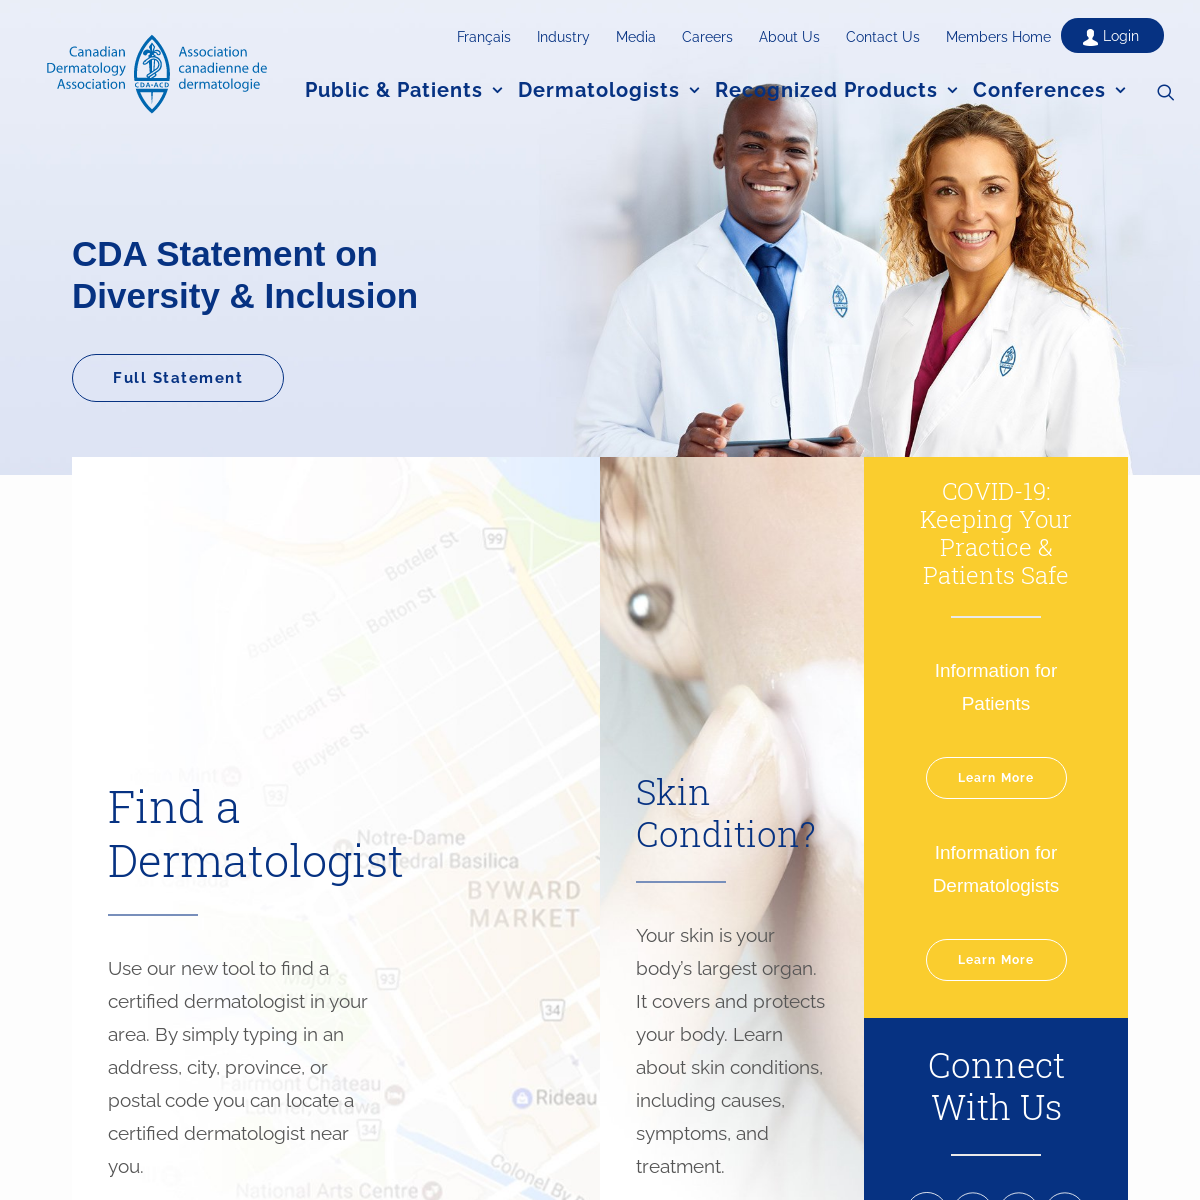 A complete backup of dermatology.ca